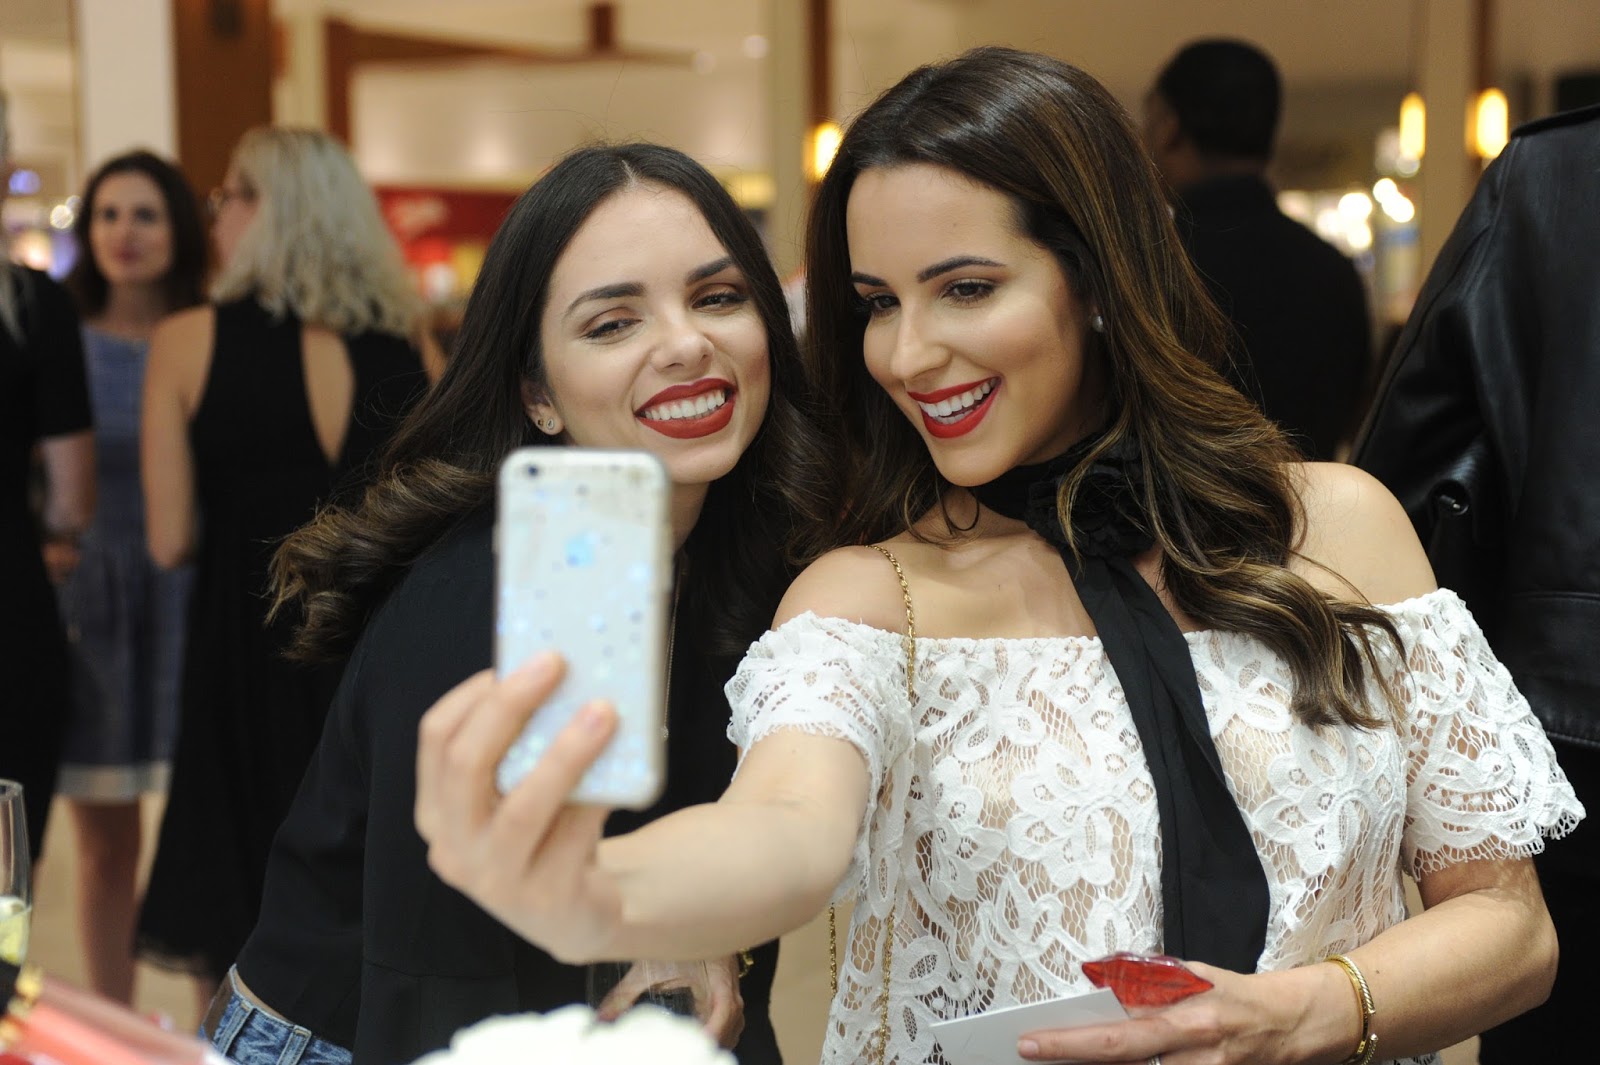  Bloggers Daniela Ramirez and Kelly Saks take selfies at the Chanel Fragrance & Beauty Boutique Opening in Aventura, Florida